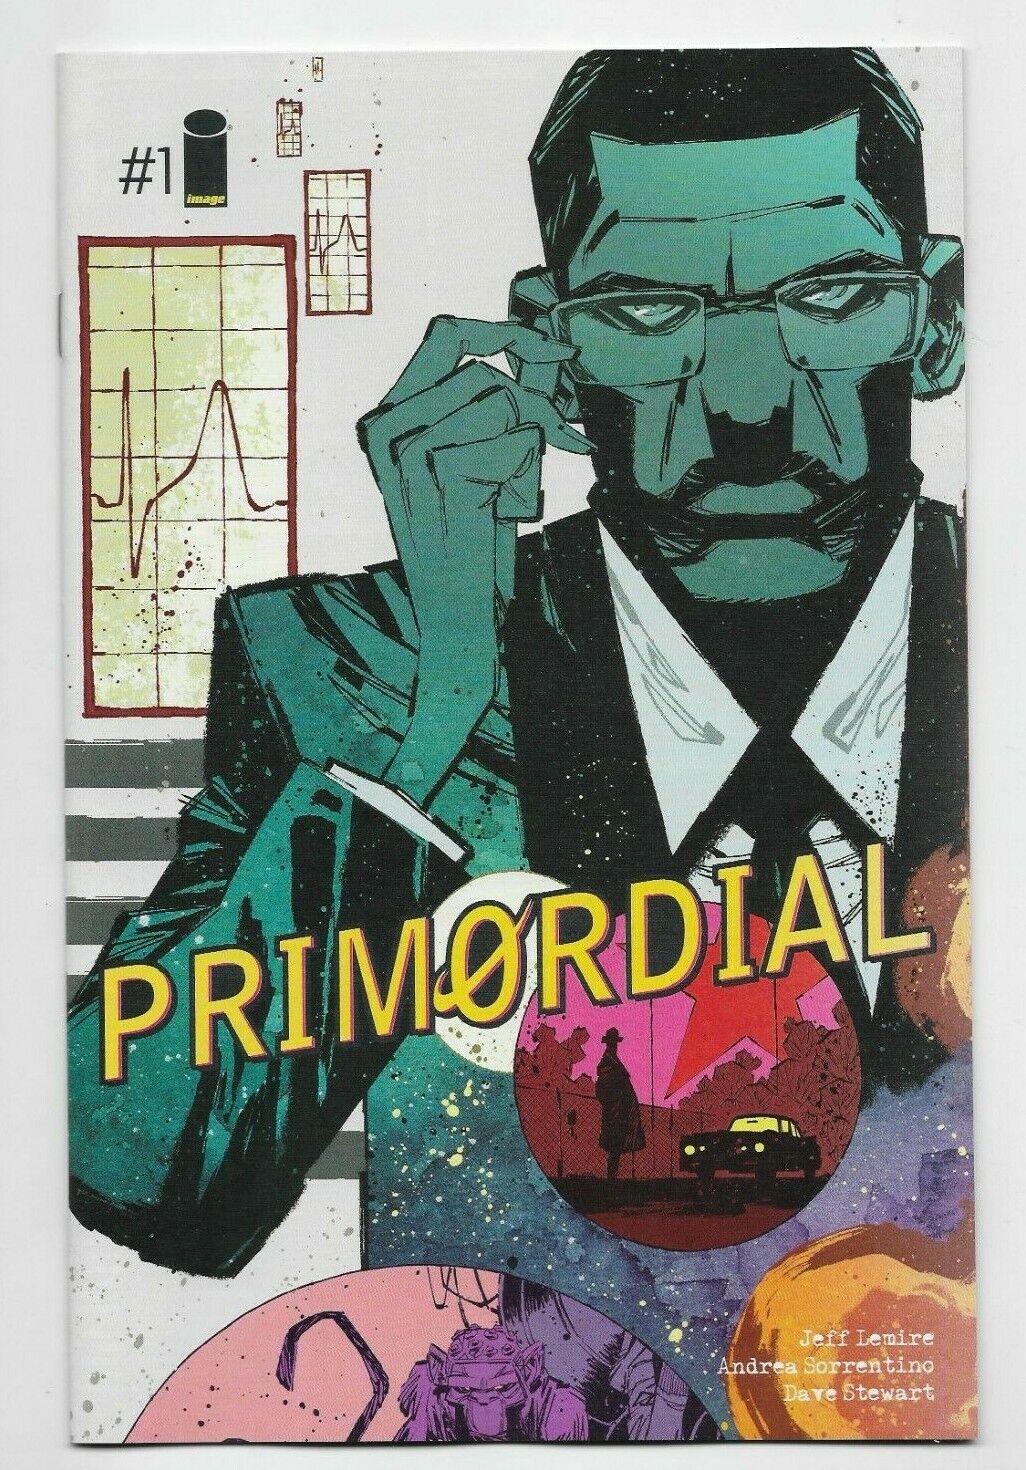 Primoridal #1 2021 Jorge Corona Time Warp Exclusive Variant Cover Limited to 500